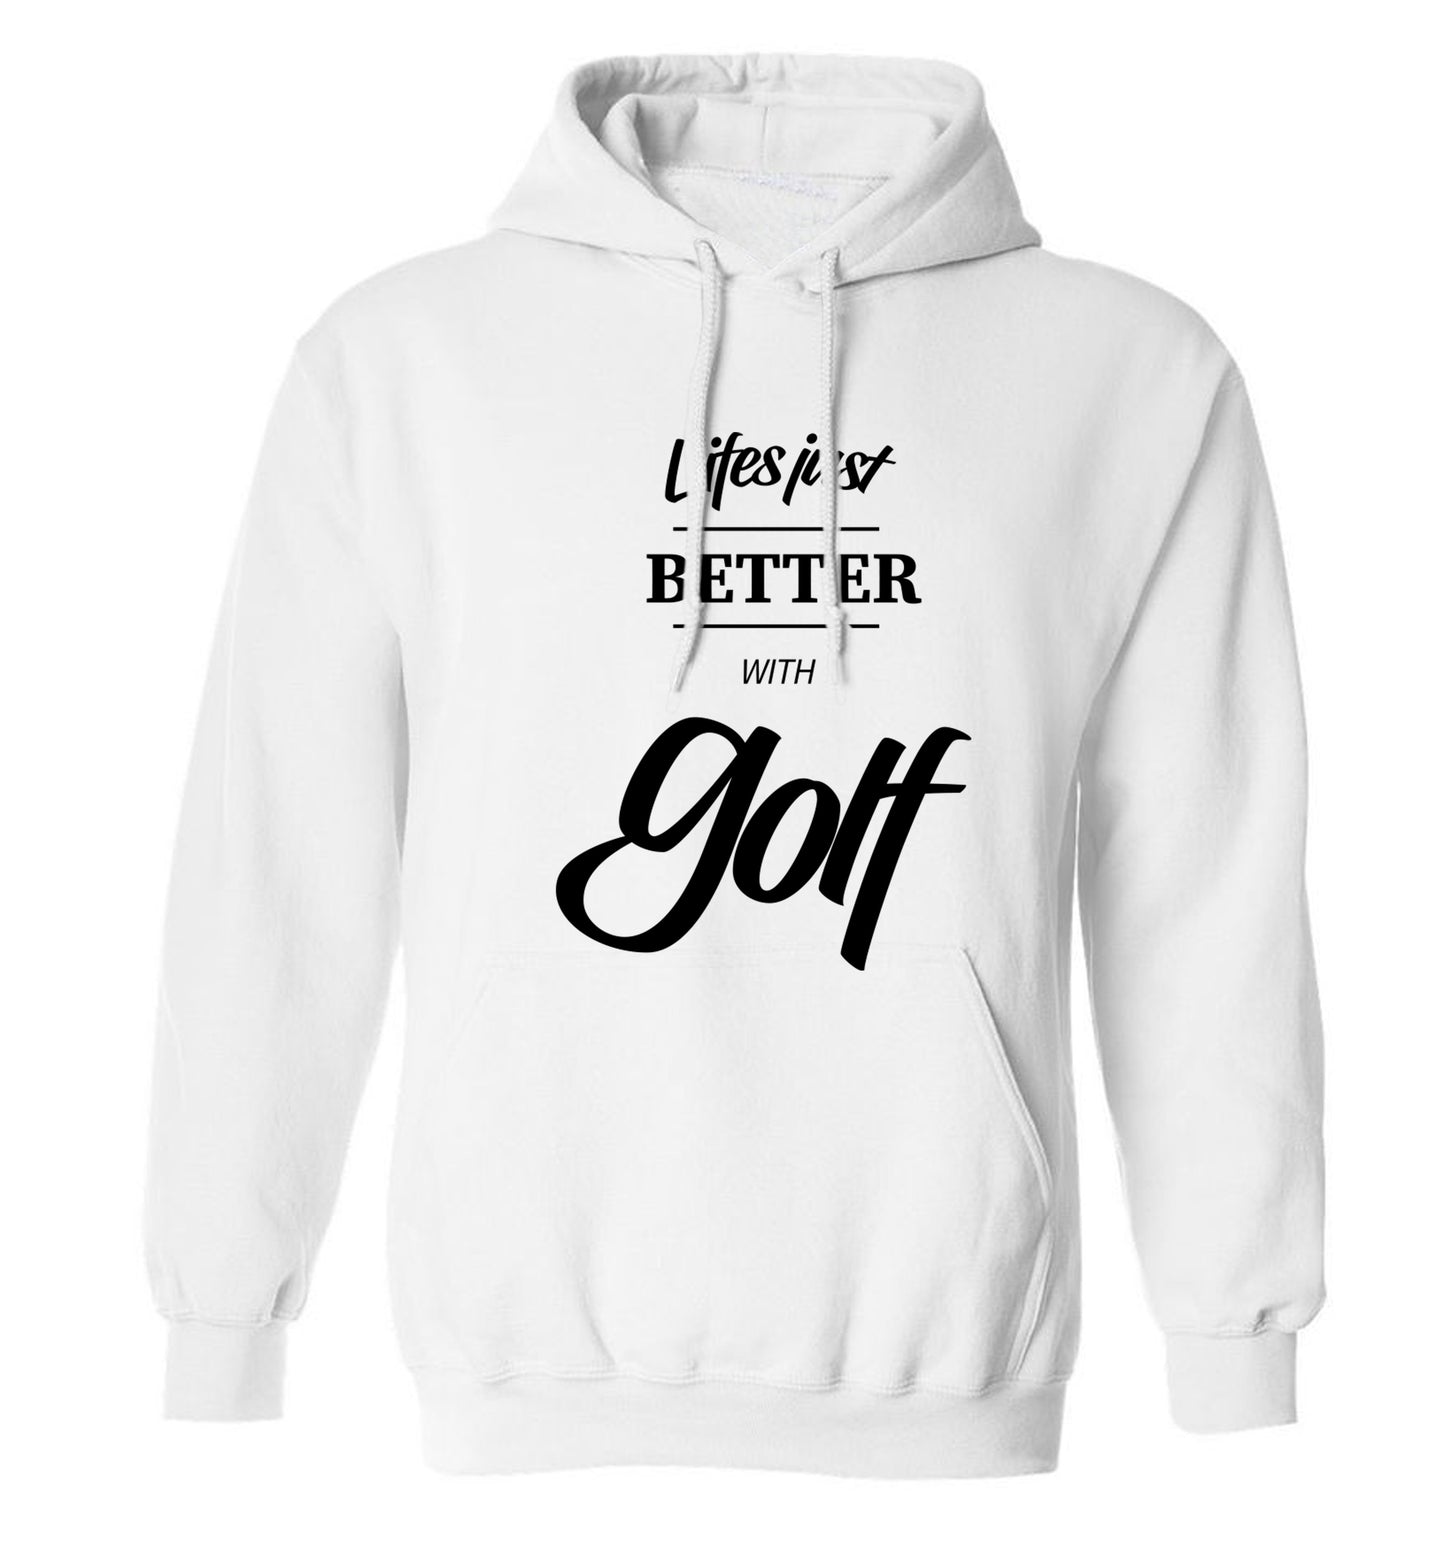 Life is better with golf adults unisex white hoodie 2XL